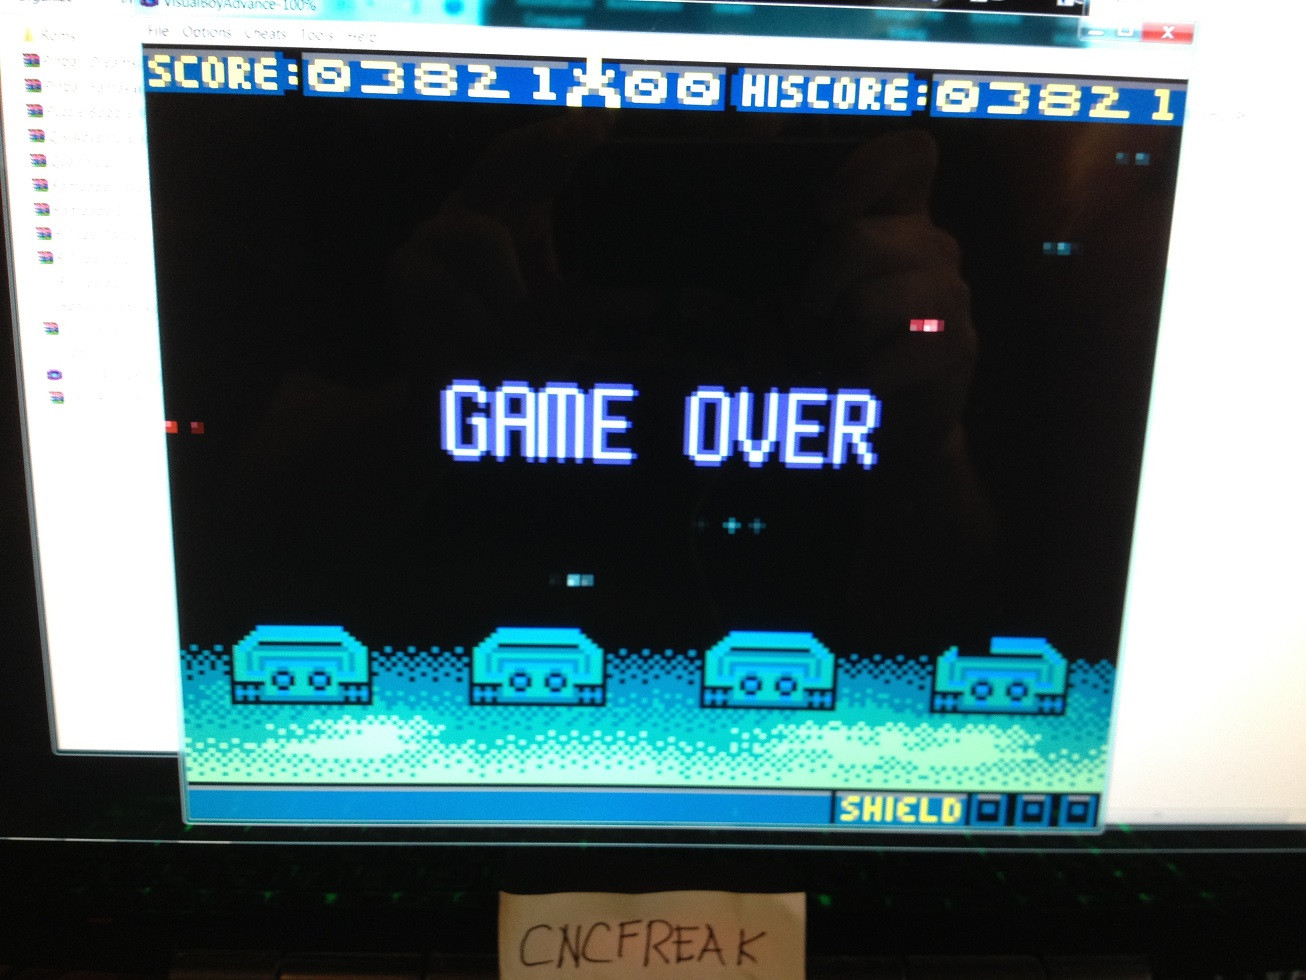 cncfreak: Space Invaders (Game Boy Emulated) 3,821 points on 2013-10-07 23:04:46